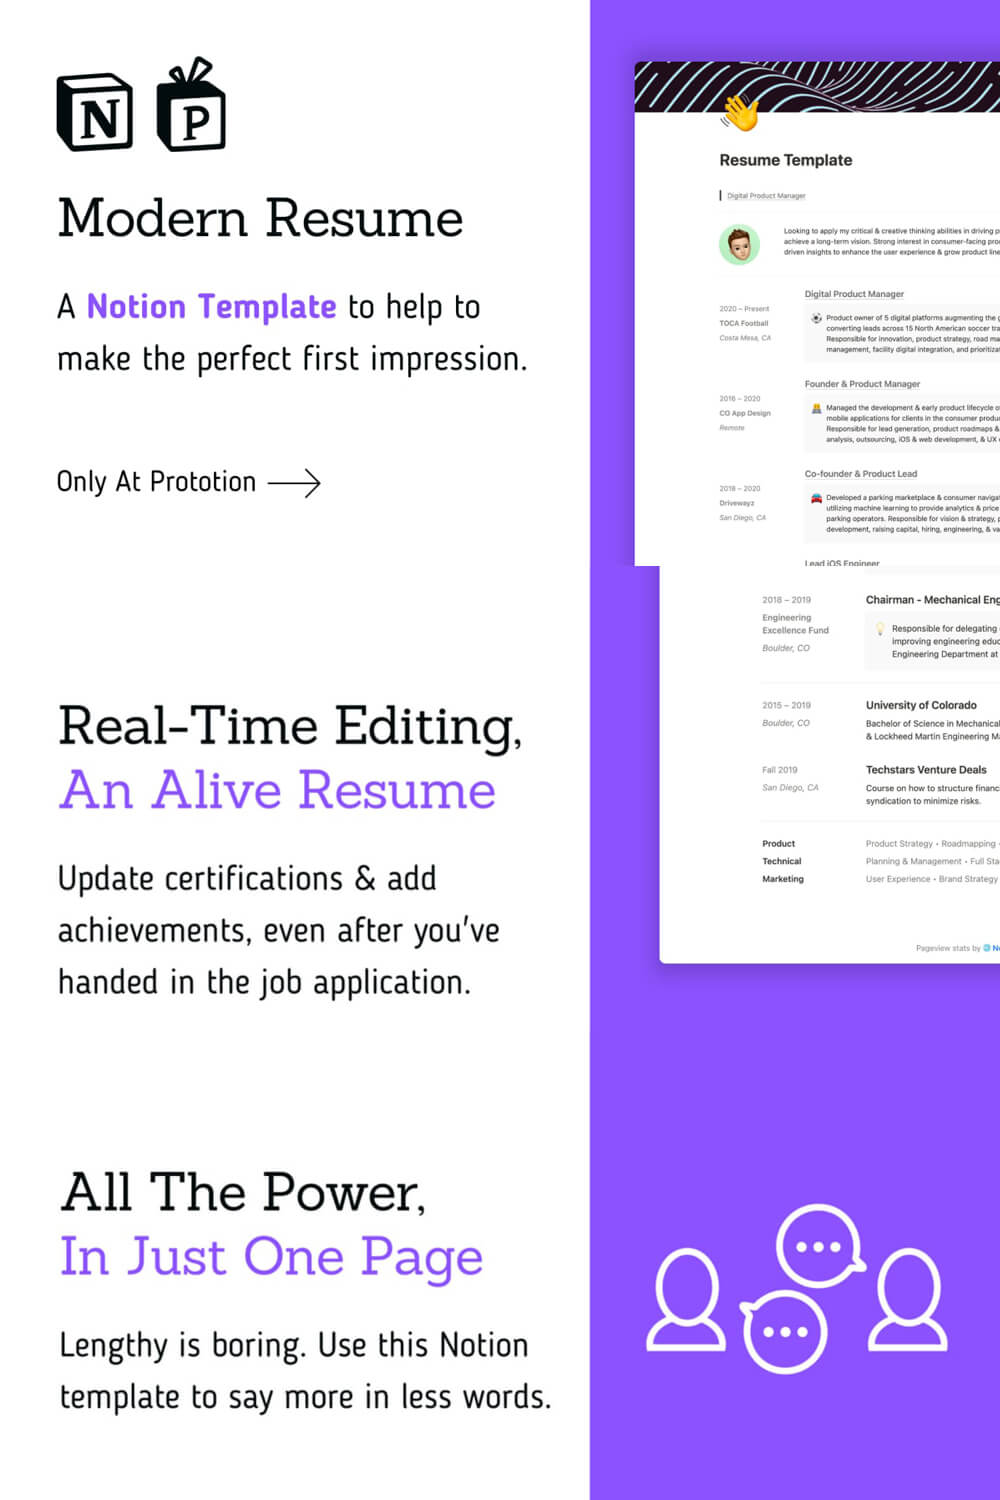 A modern resume - a notion template to help to make the perfect first impression.